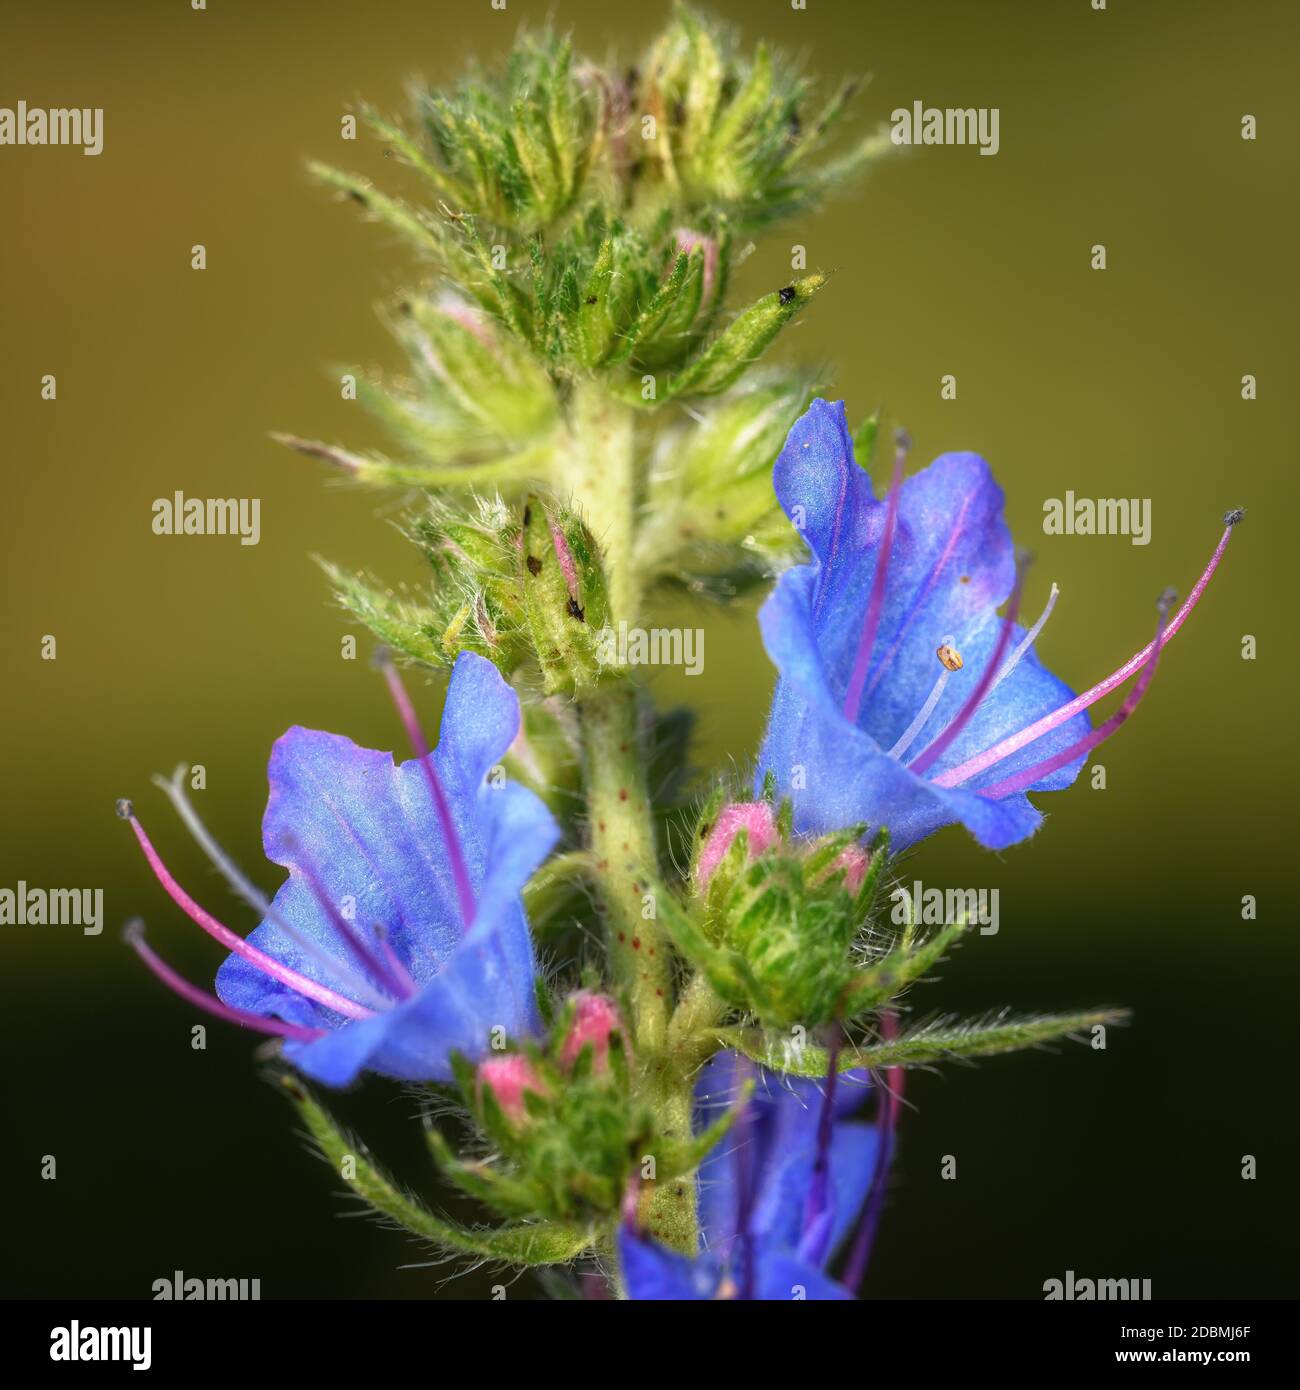 flower 'Echium vulgare' close-up, in a natural environment Stock Photo